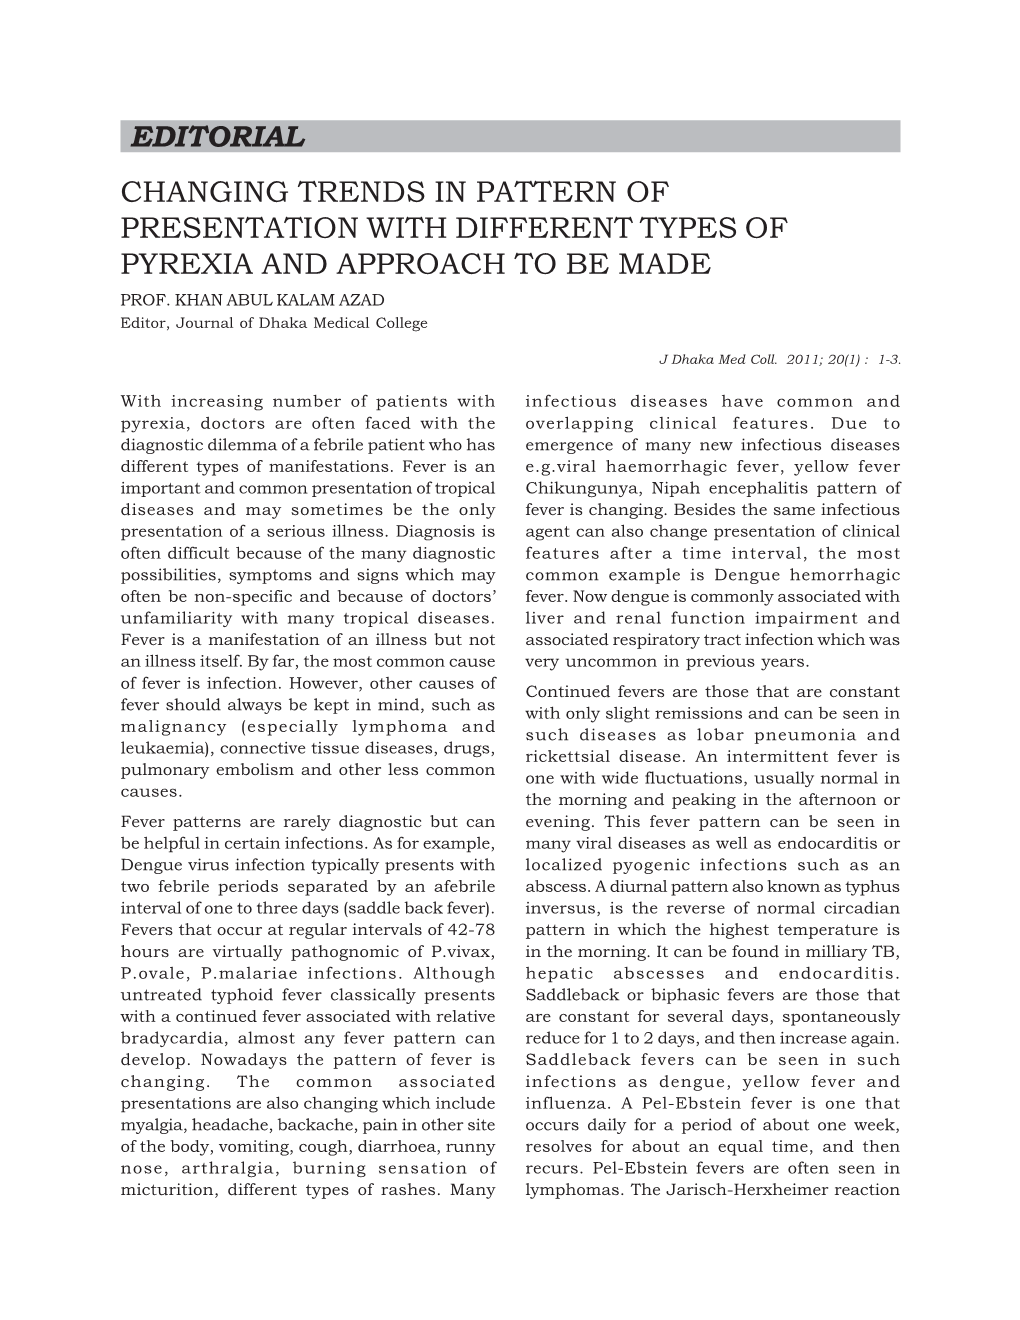 Editorial Changing Trends in Pattern of Presentation with Different Types of Pyrexia and Approach to Be Made Prof